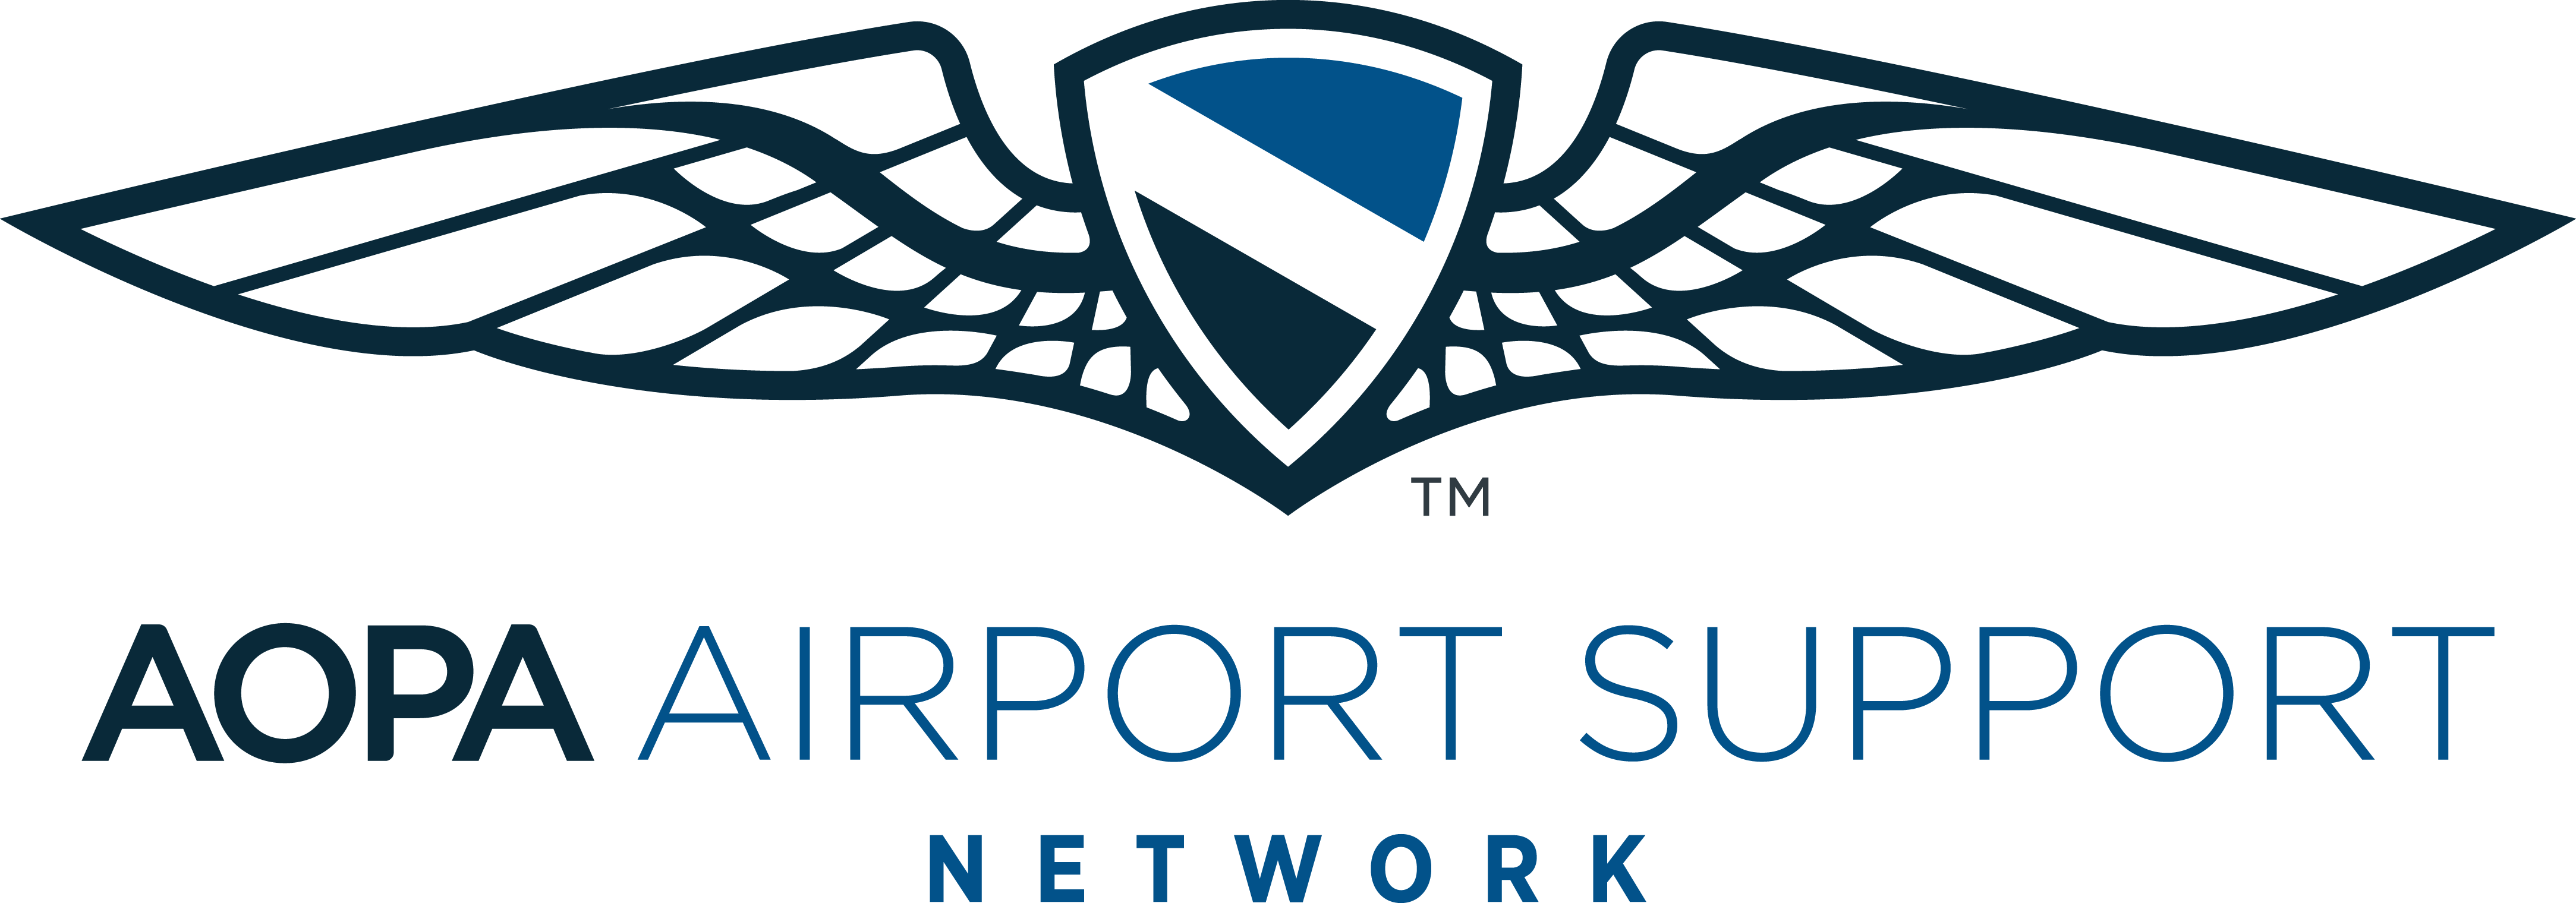 Airport Support Network